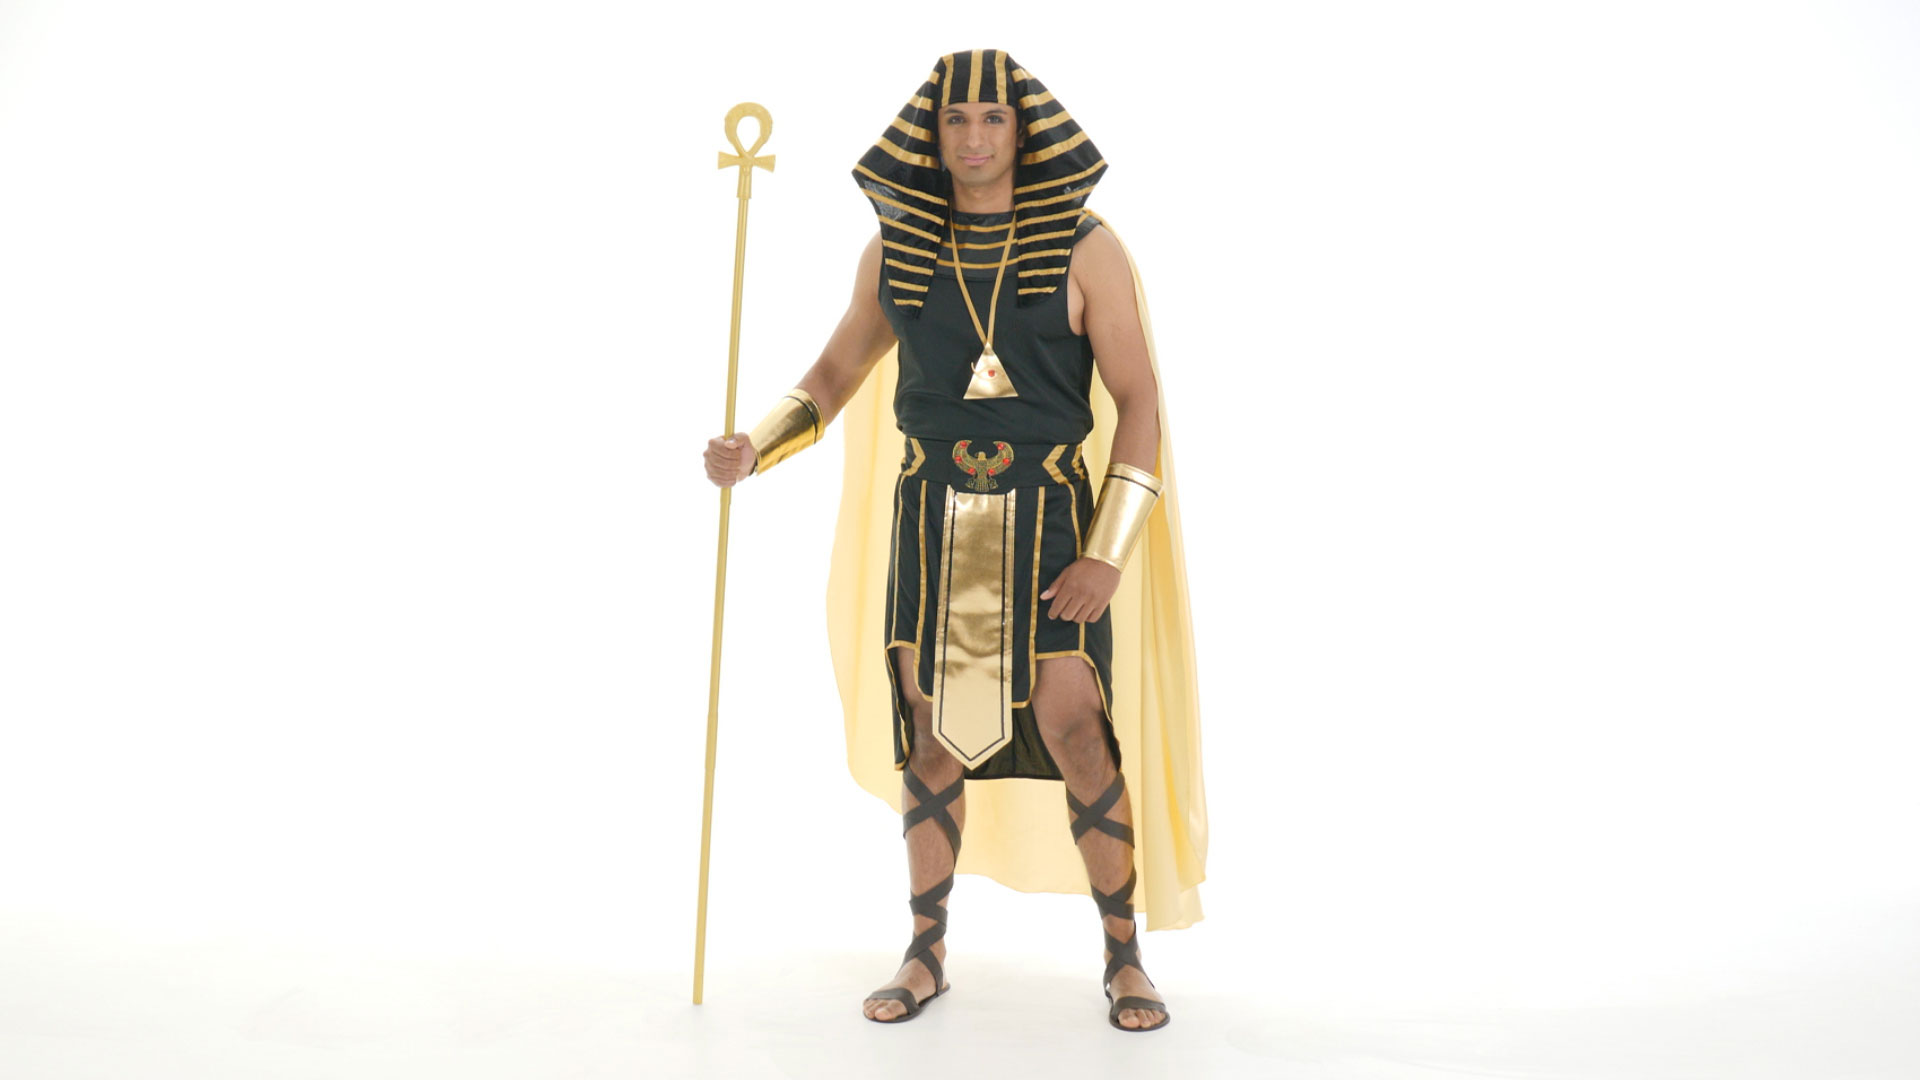 You'd better bow down when the King of Egypt enters the room. You'll be the ultimate ruler when you're dressed in this costume.